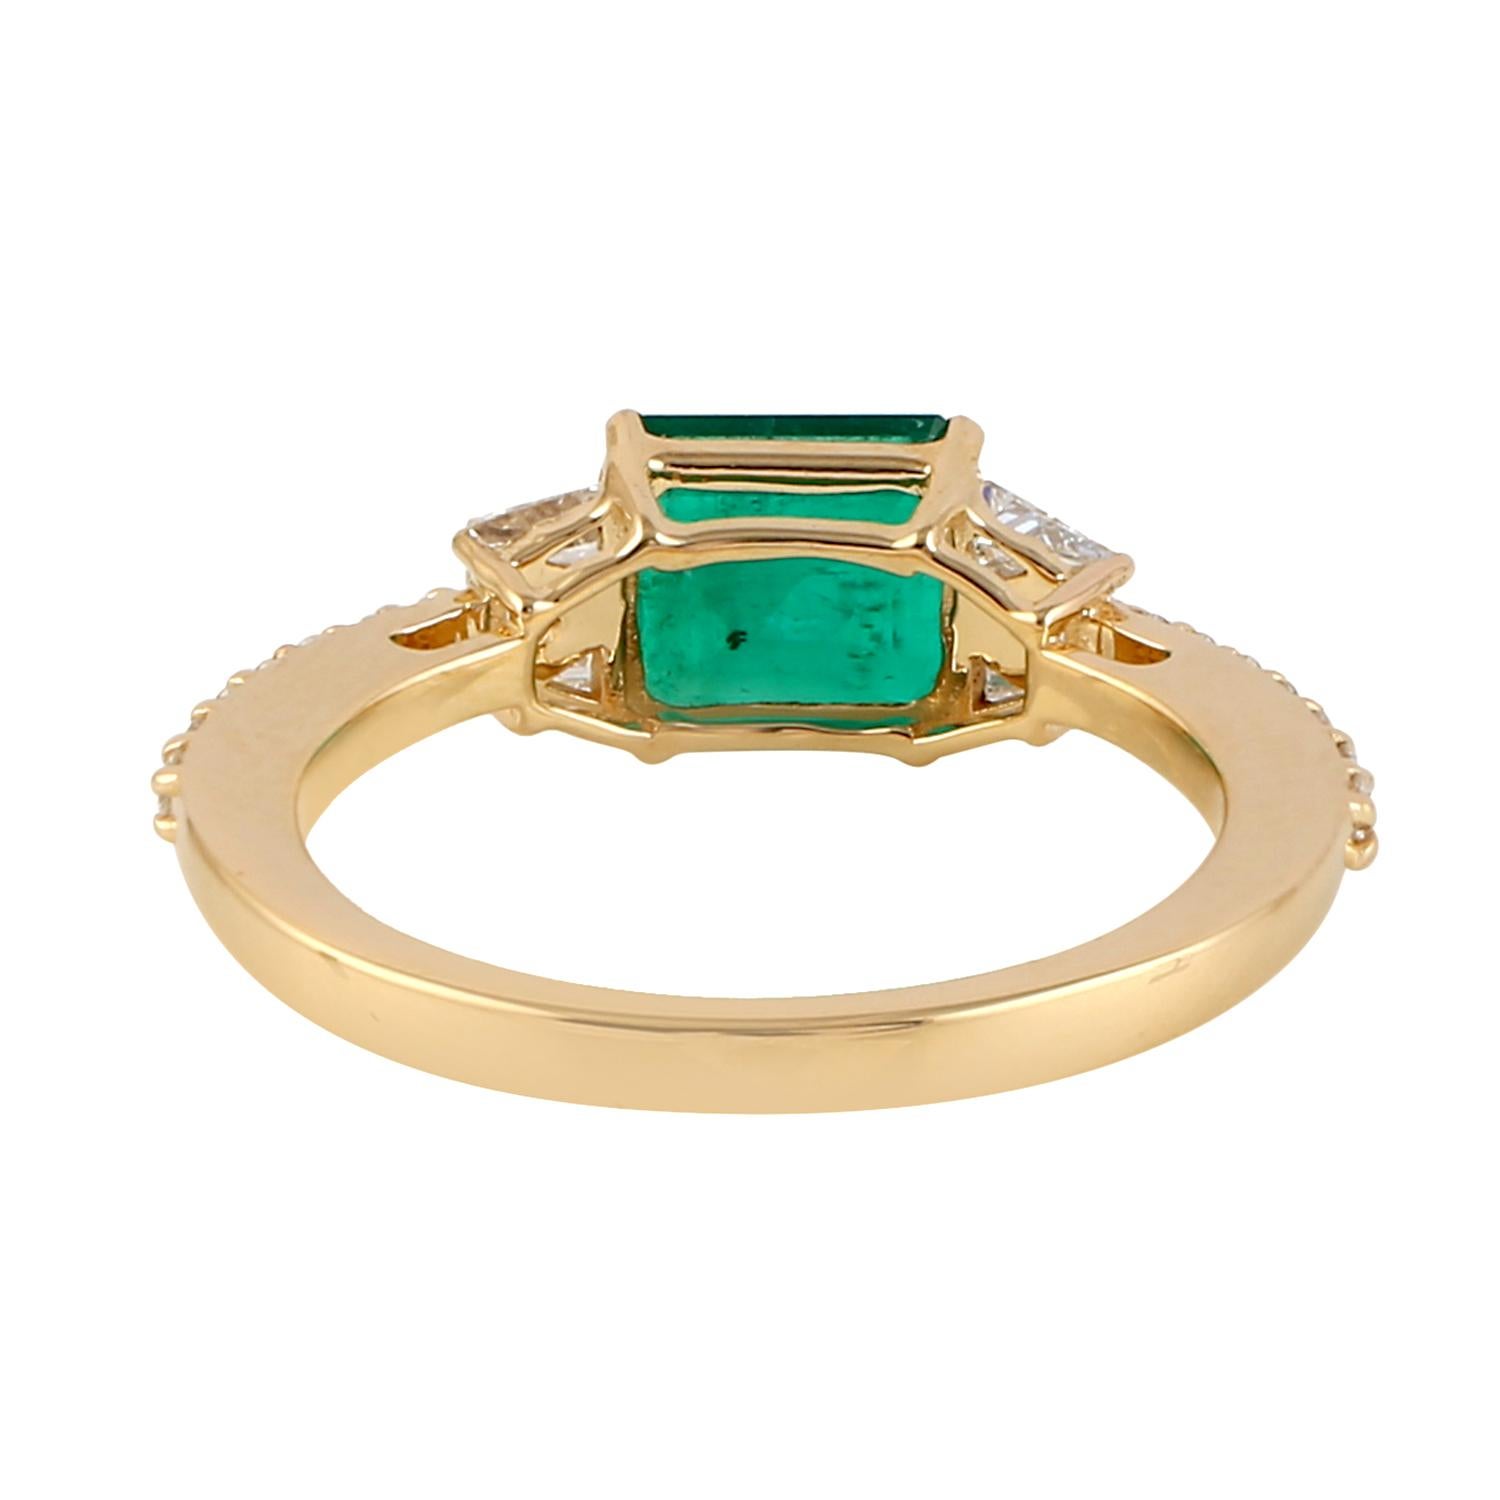 This ring has been meticulously crafted from 14-karat gold.  It is hand set with 1.53 carats emerald & .42 carats of sparkling diamonds. 

The ring is a size 7 and may be resized to larger or smaller upon request. 
FOLLOW  MEGHNA JEWELS storefront